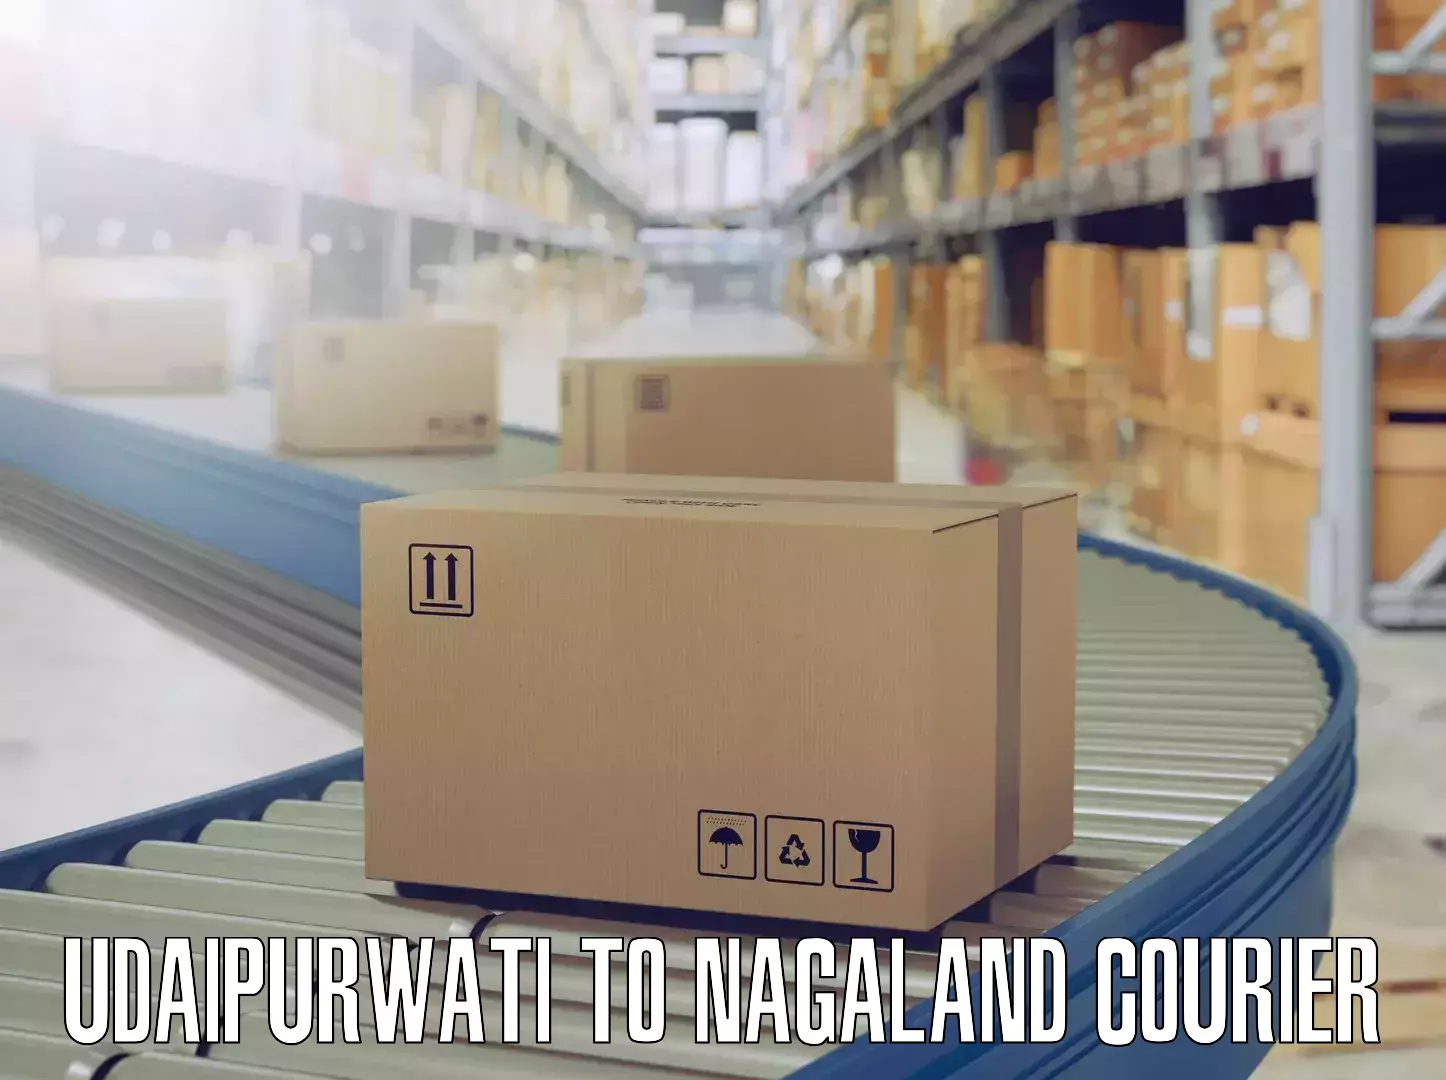 Cost-effective moving options Udaipurwati to Mon